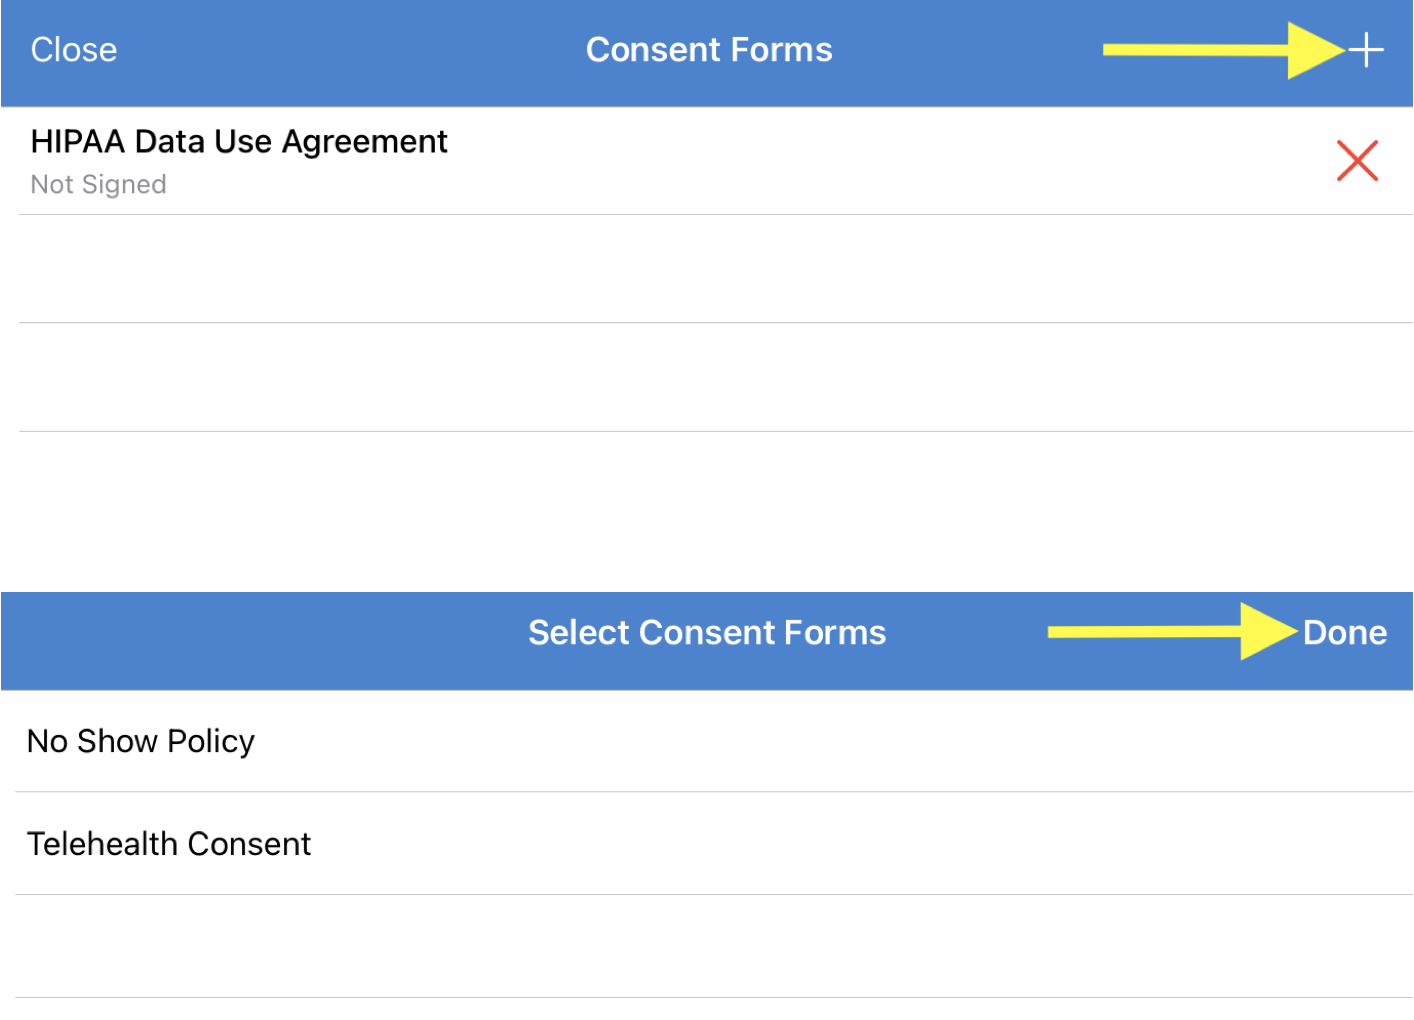 Consent_forms_Add_and_Select.png